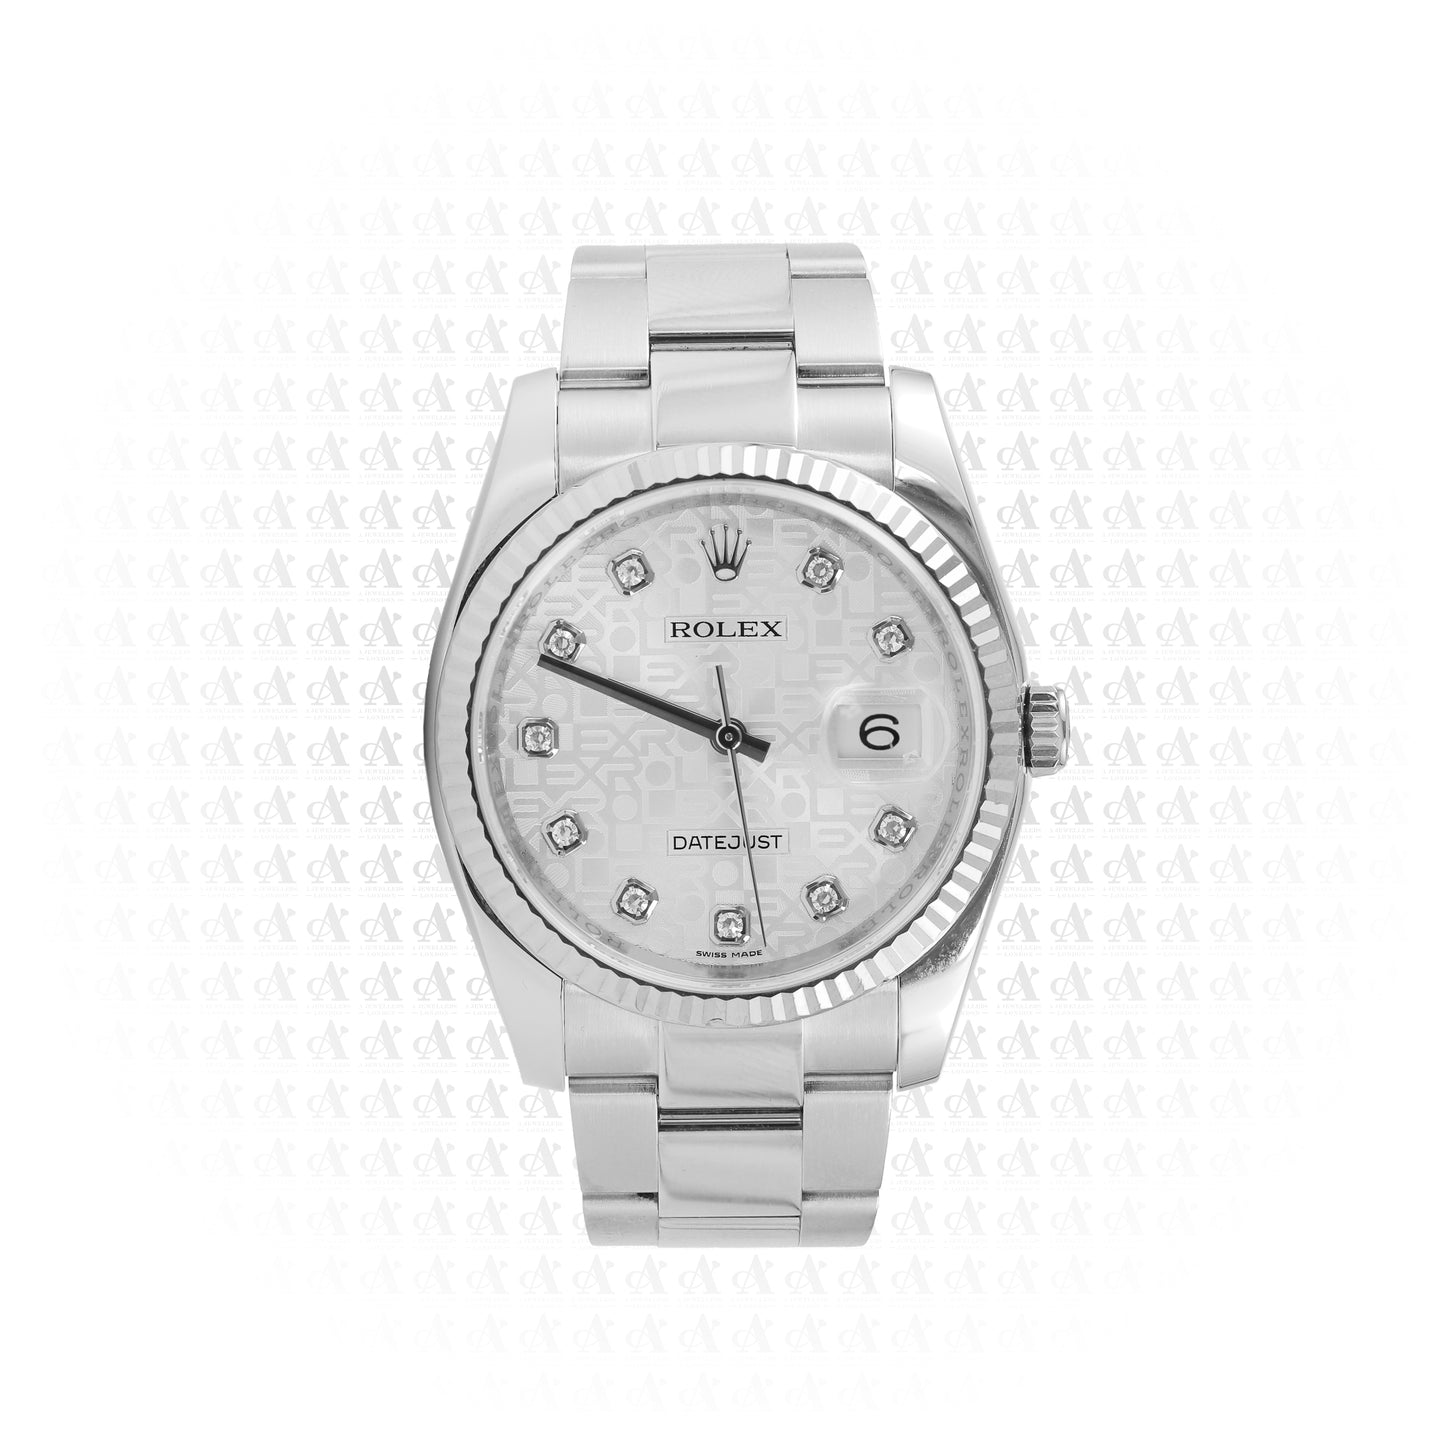 Rolex Datejust 36mm Silver Dial 2015 116234